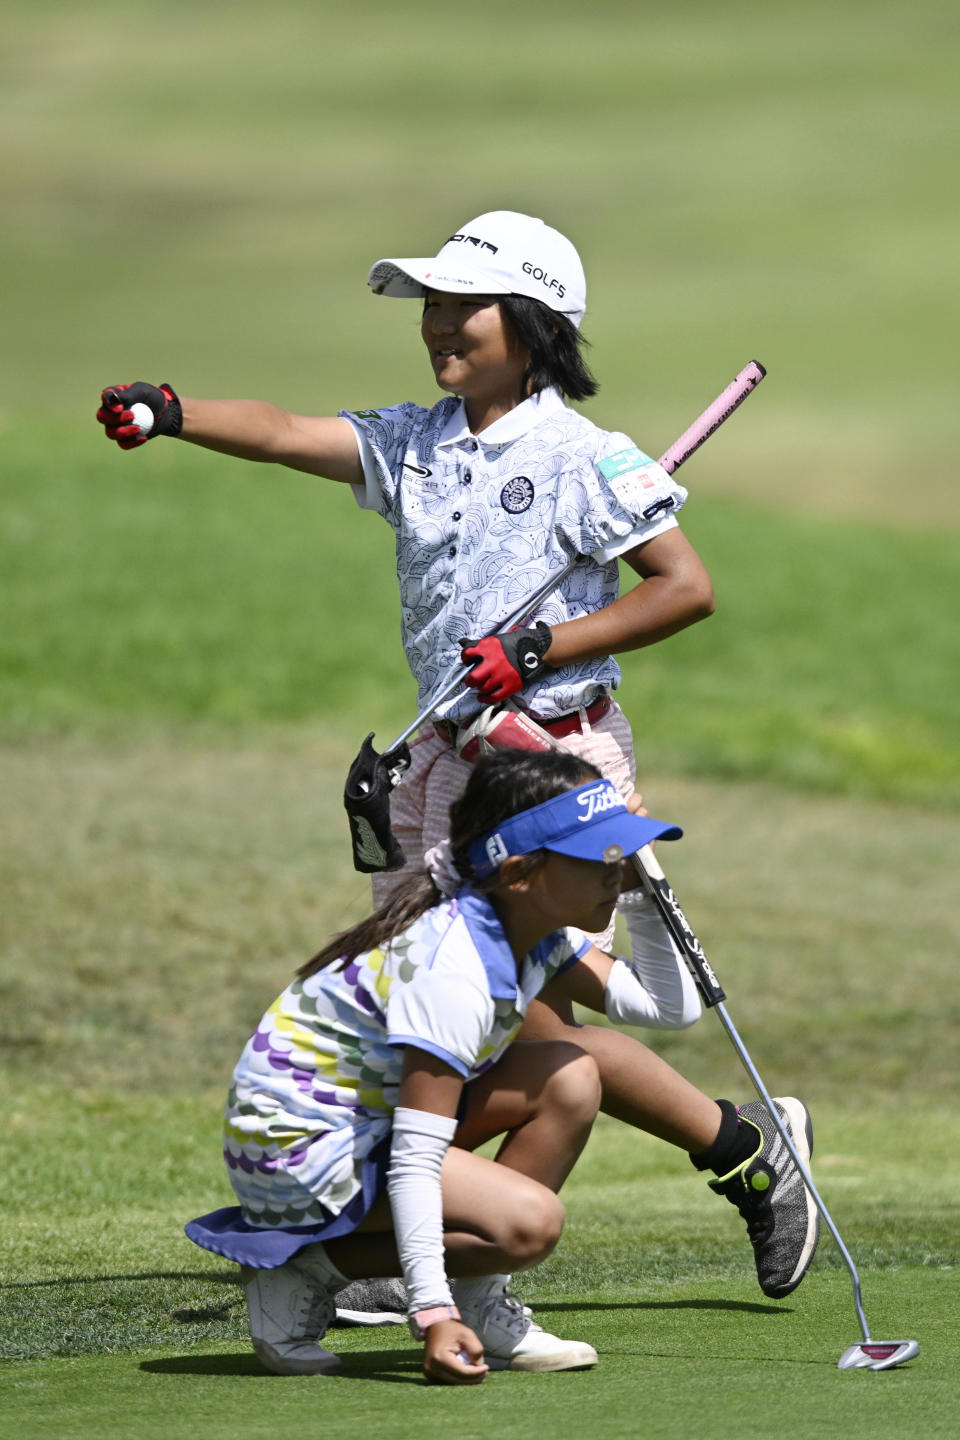 Miroku Suto of Japan holds up the ball after hitting a birdie putt on the ninth hole as Isabell Duan lines up her putt during the final round at the Junior World Championships golf tournament held at Singing Hills Golf Resort on Thursday, July 14, 2022, in El Cajon, Calif. (AP Photo/Denis Poroy)